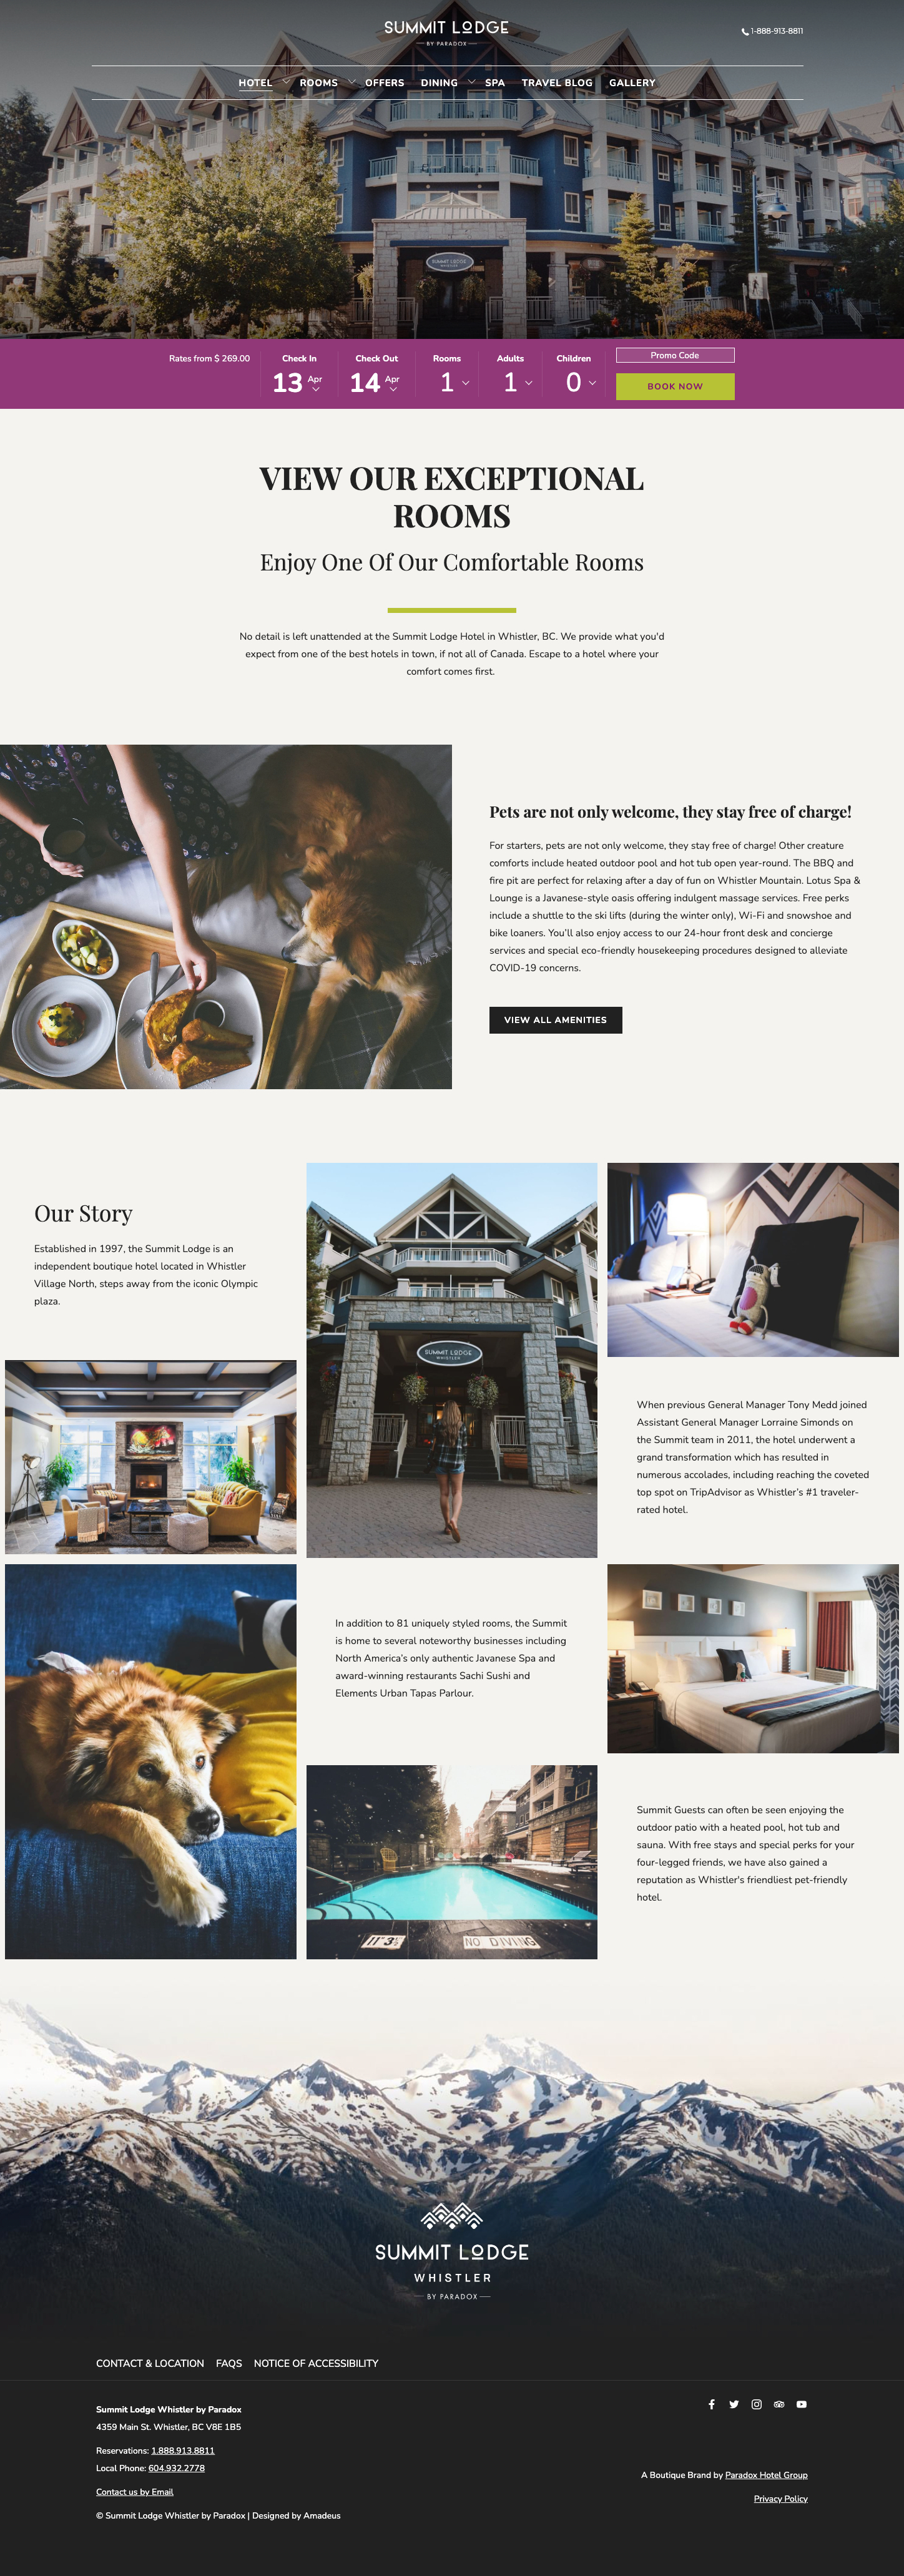 Summit Lodge - About Page Design